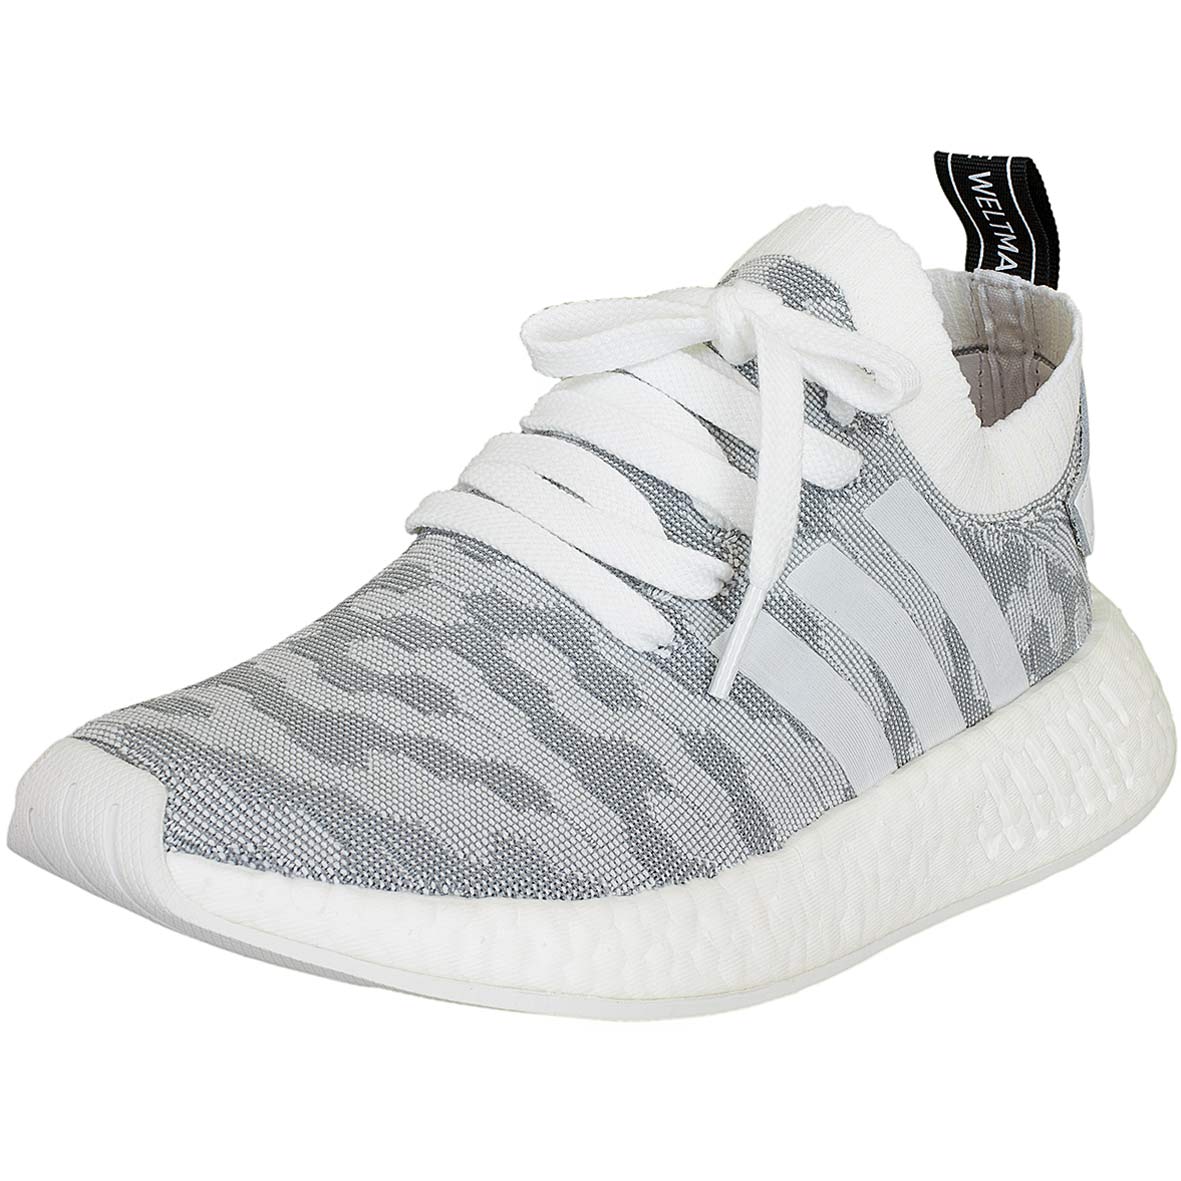 Limited Time Deals New Deals Everyday Adidas Schuhe Damen Nmd R1 Off 78 Buy